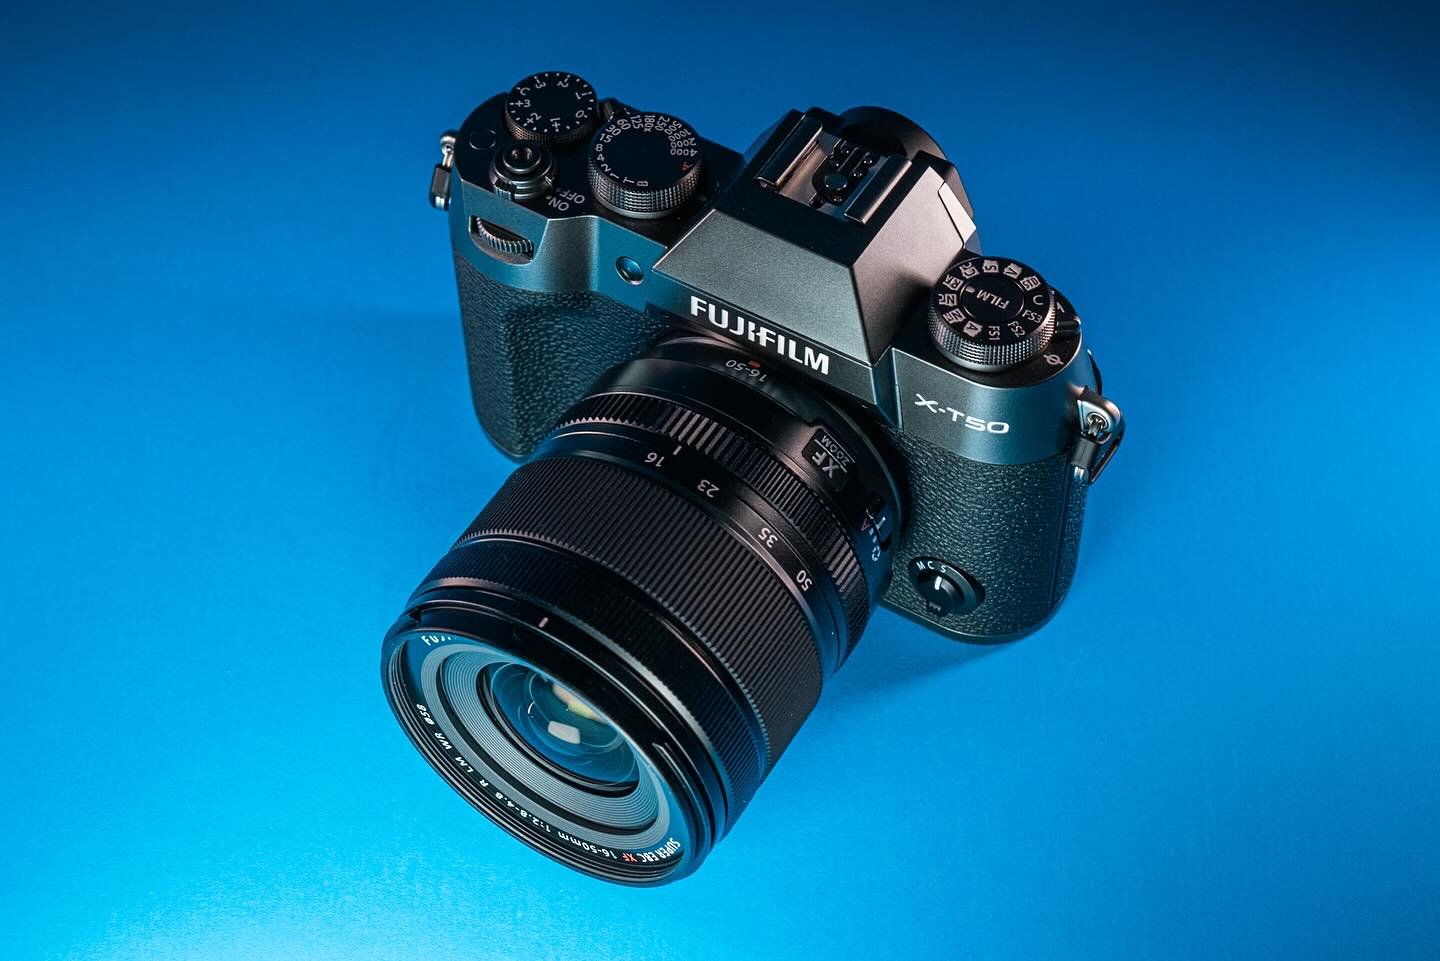 I got to spend some time with the new @fujifilmx_us X-T50 and XF 16-50mm f2.8-4.8. It&rsquo;s such an amazing combination of power and performance (40MP sensor, in-body image stabilization and subject detection autofocus) in a small, light and fun to